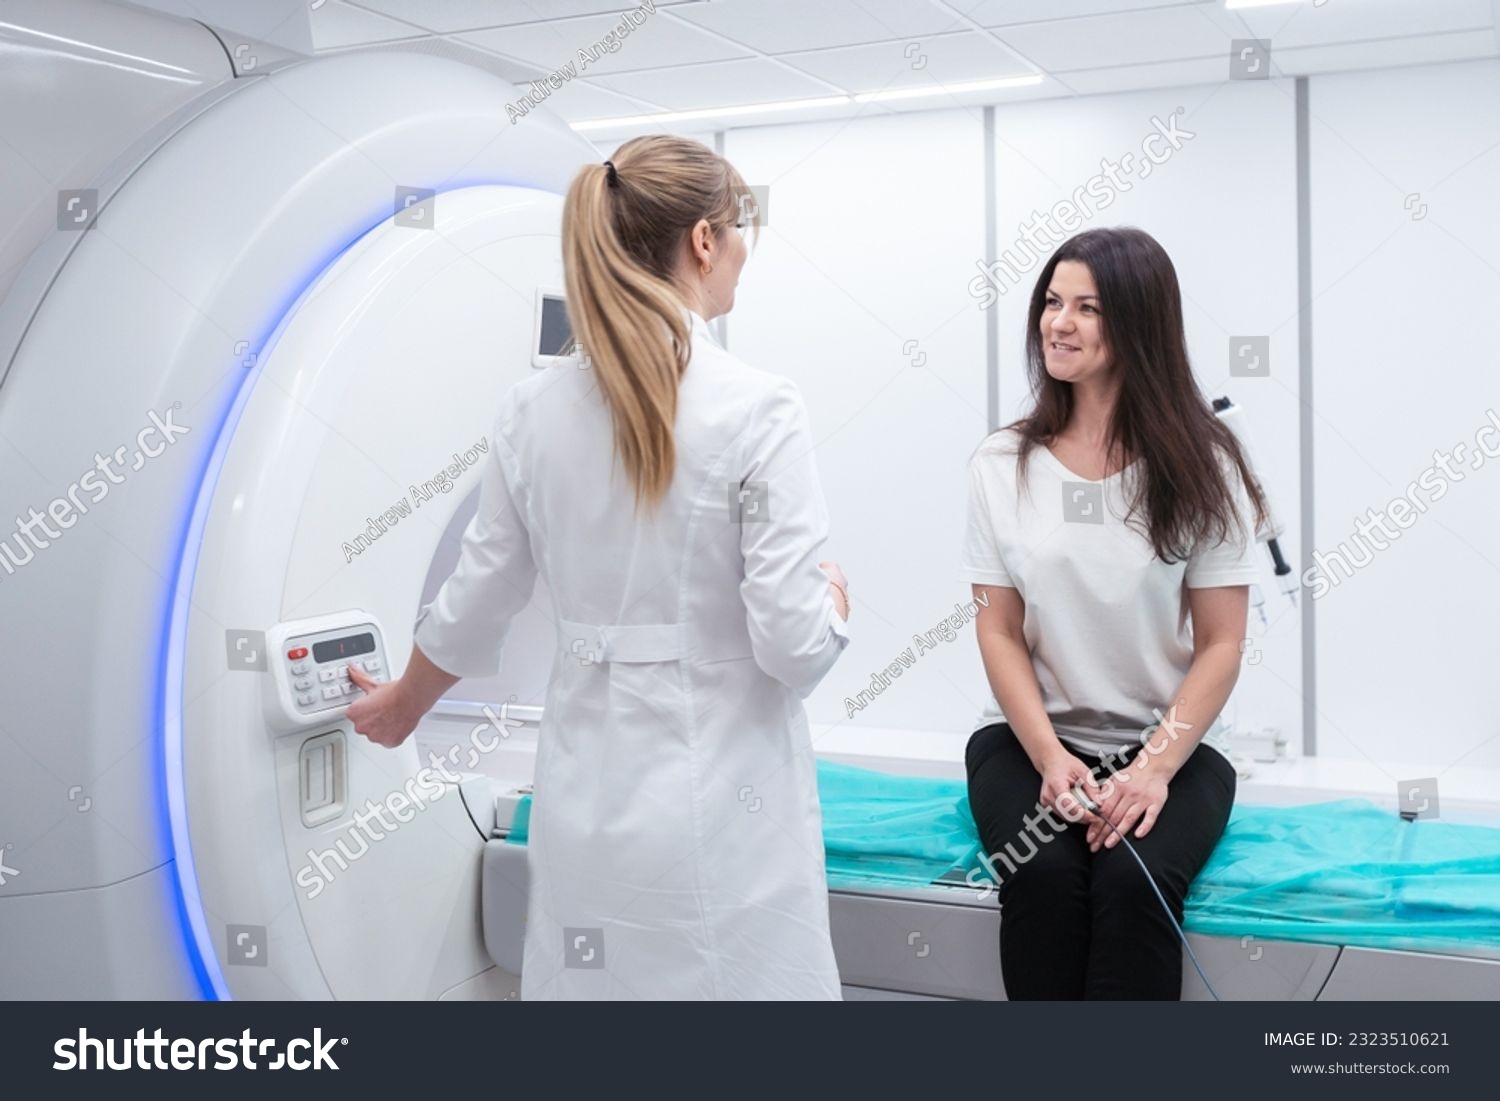 Female patient undergoing MRI - Magnetic resonance imaging in Hospital. Medical Equipment and Health Care #2323510621